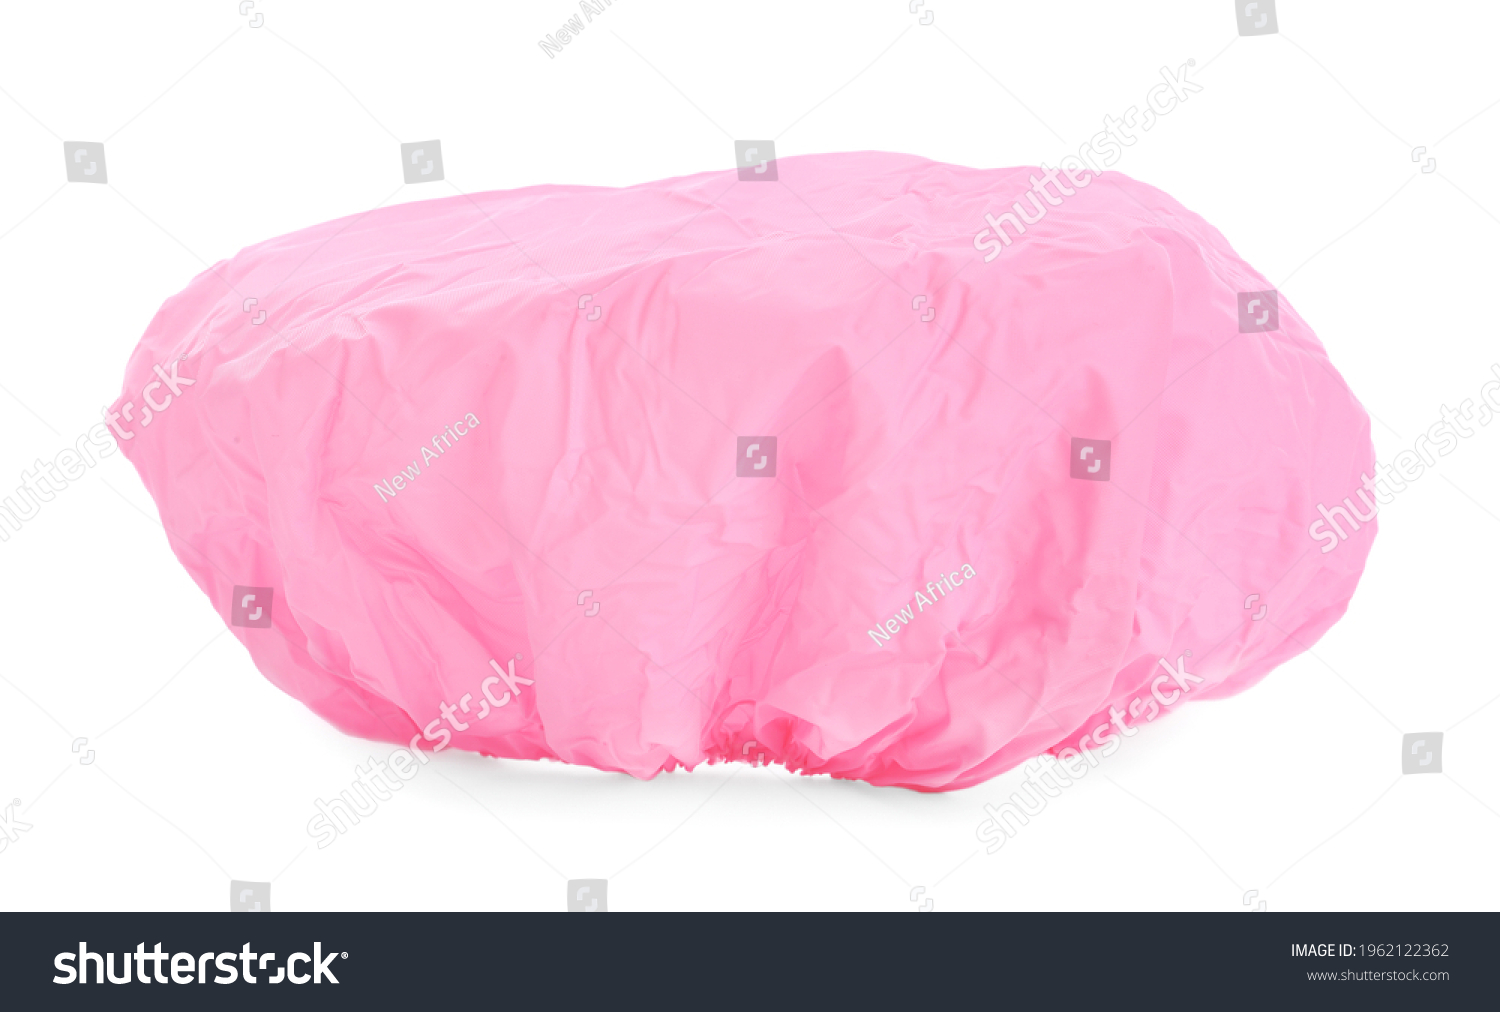 Pink waterproof shower cap isolated on white #1962122362